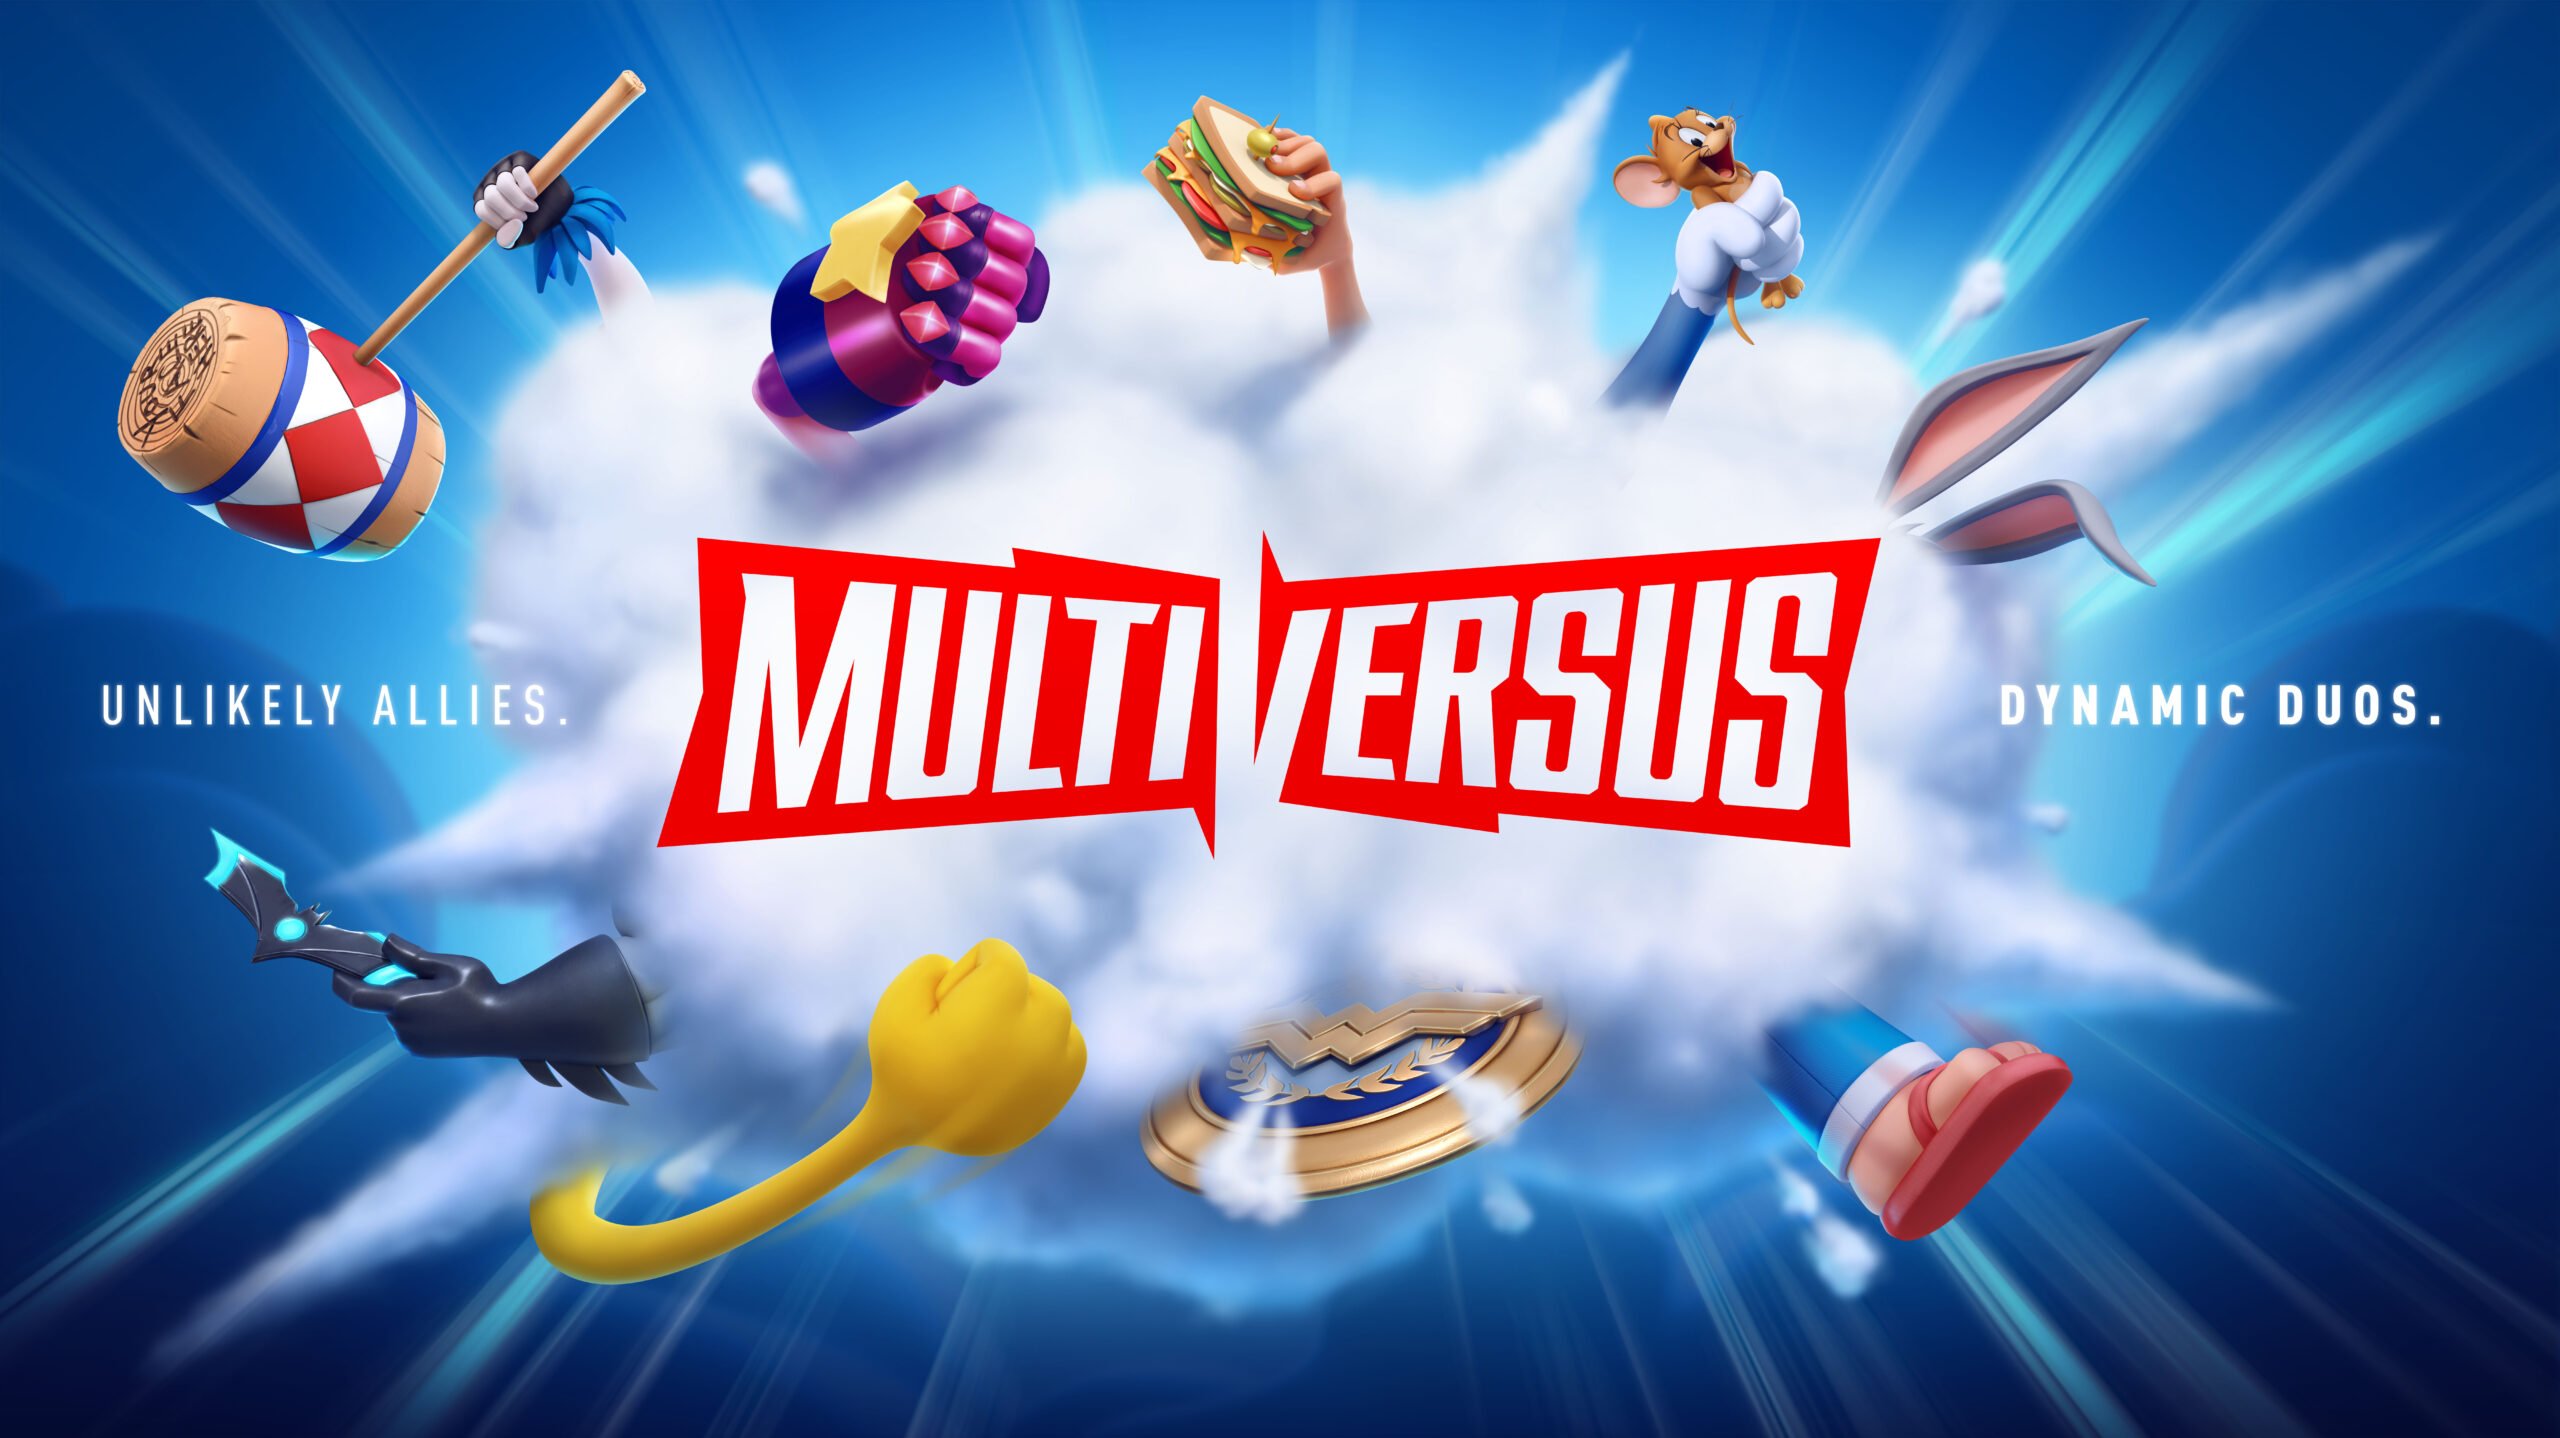 Warner Bros.'s competitive platform fighting game has just been announced  and it's officially called MultiVersus